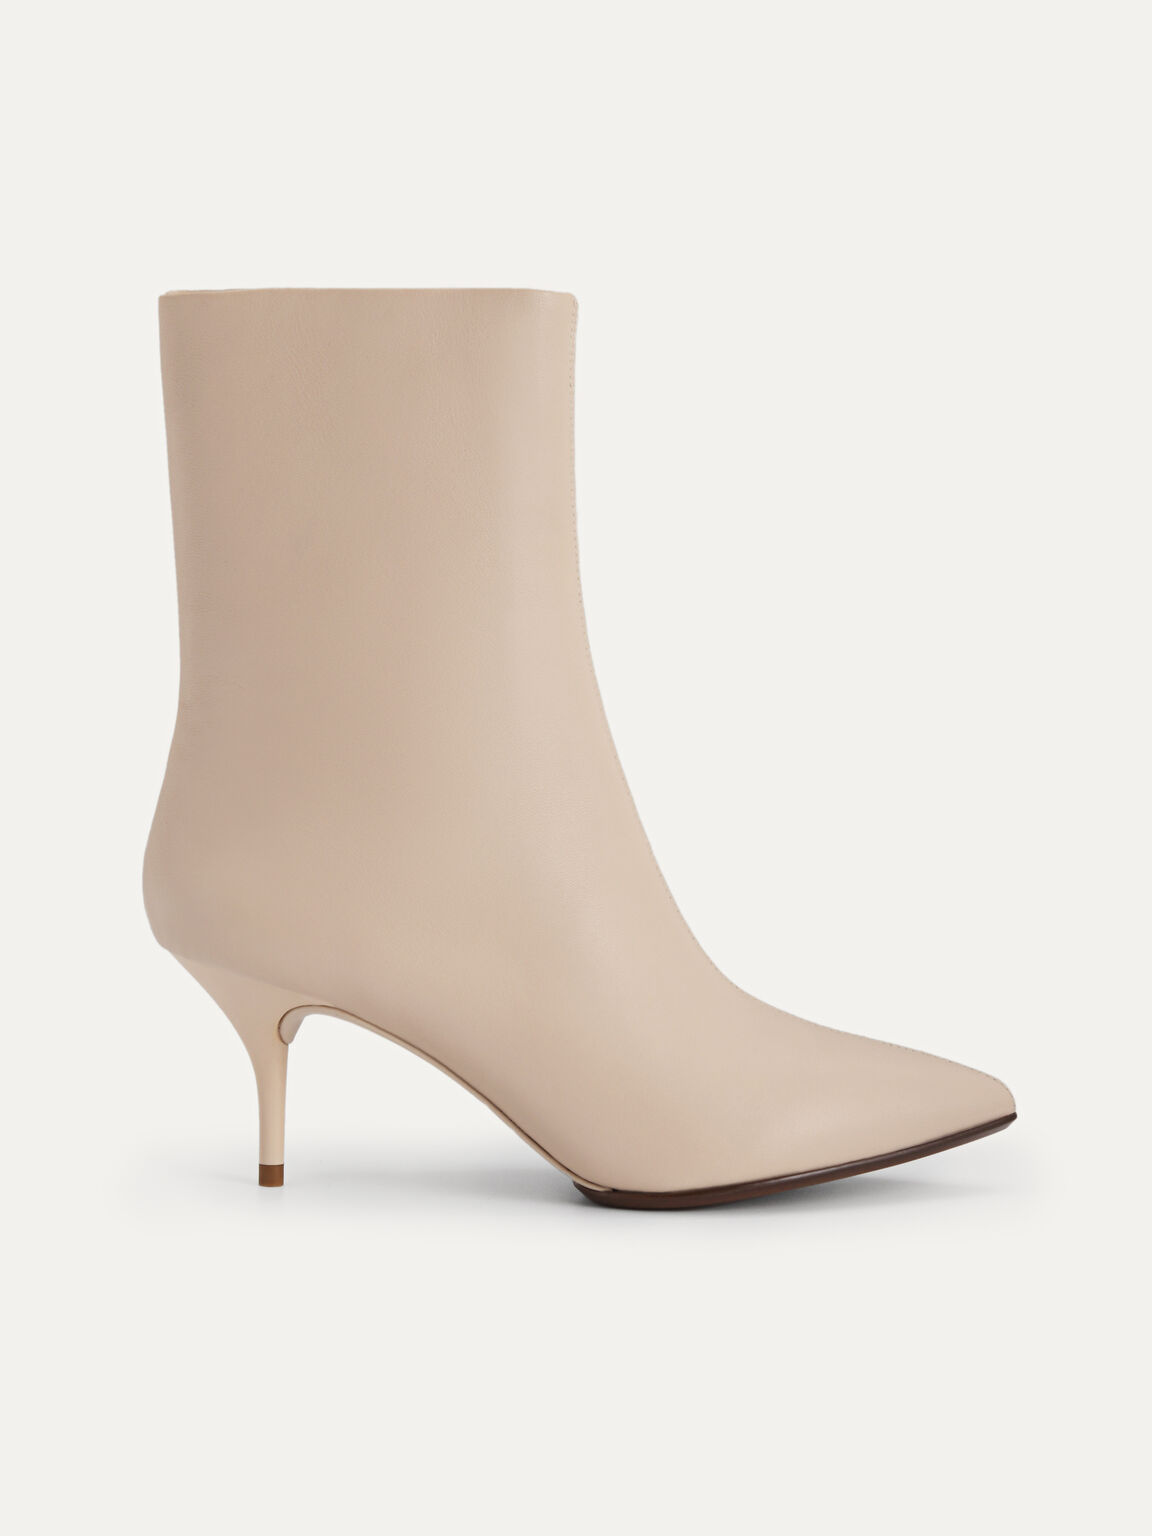 Leather Ankle Boots, Beige